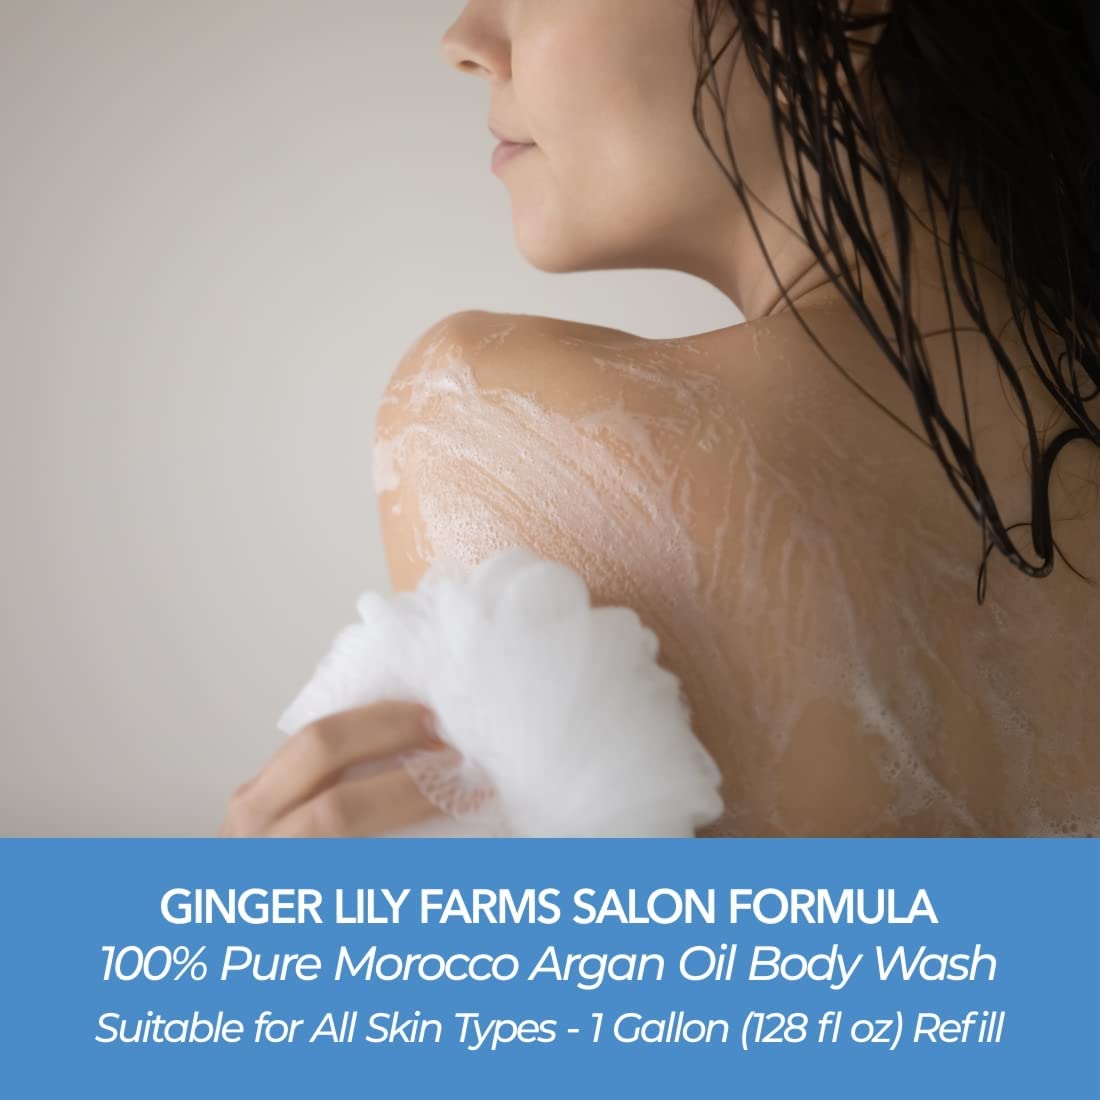 Ginger Lily Farms Salon Formula 100% Pure Morocco Argan Oil Body Wash for All Skin Types, 100% Vegan & Cruelty-Free, 1 Gallon Refill (Pack of 4)